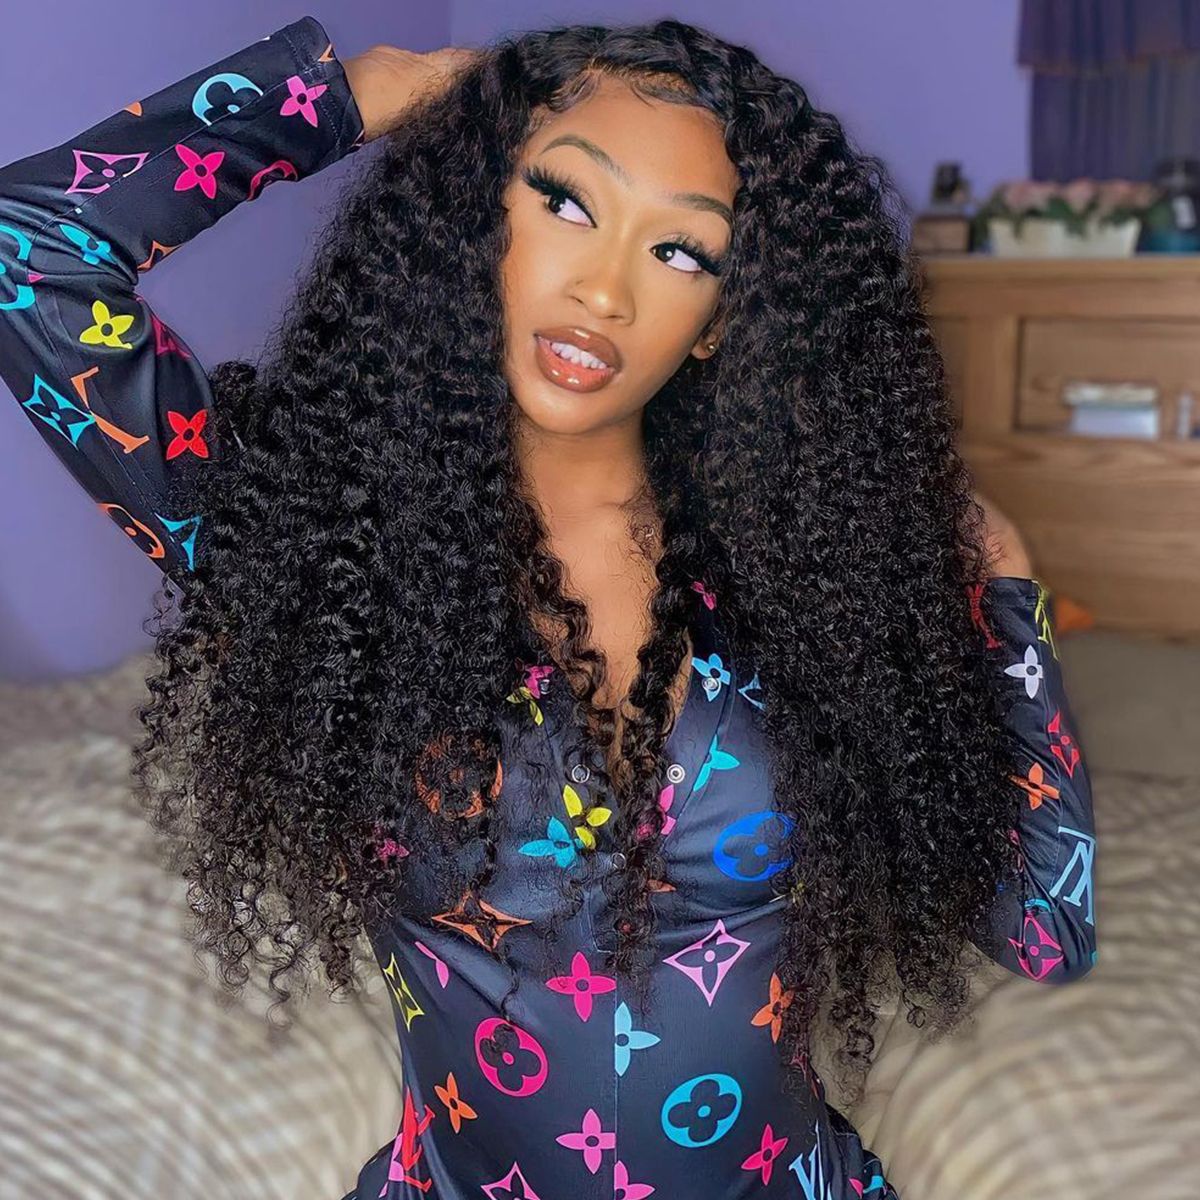 RoseHair 13x4 Lace Frontal Kinky Curly Affordable Brazilian Human Virgin Hair Wig